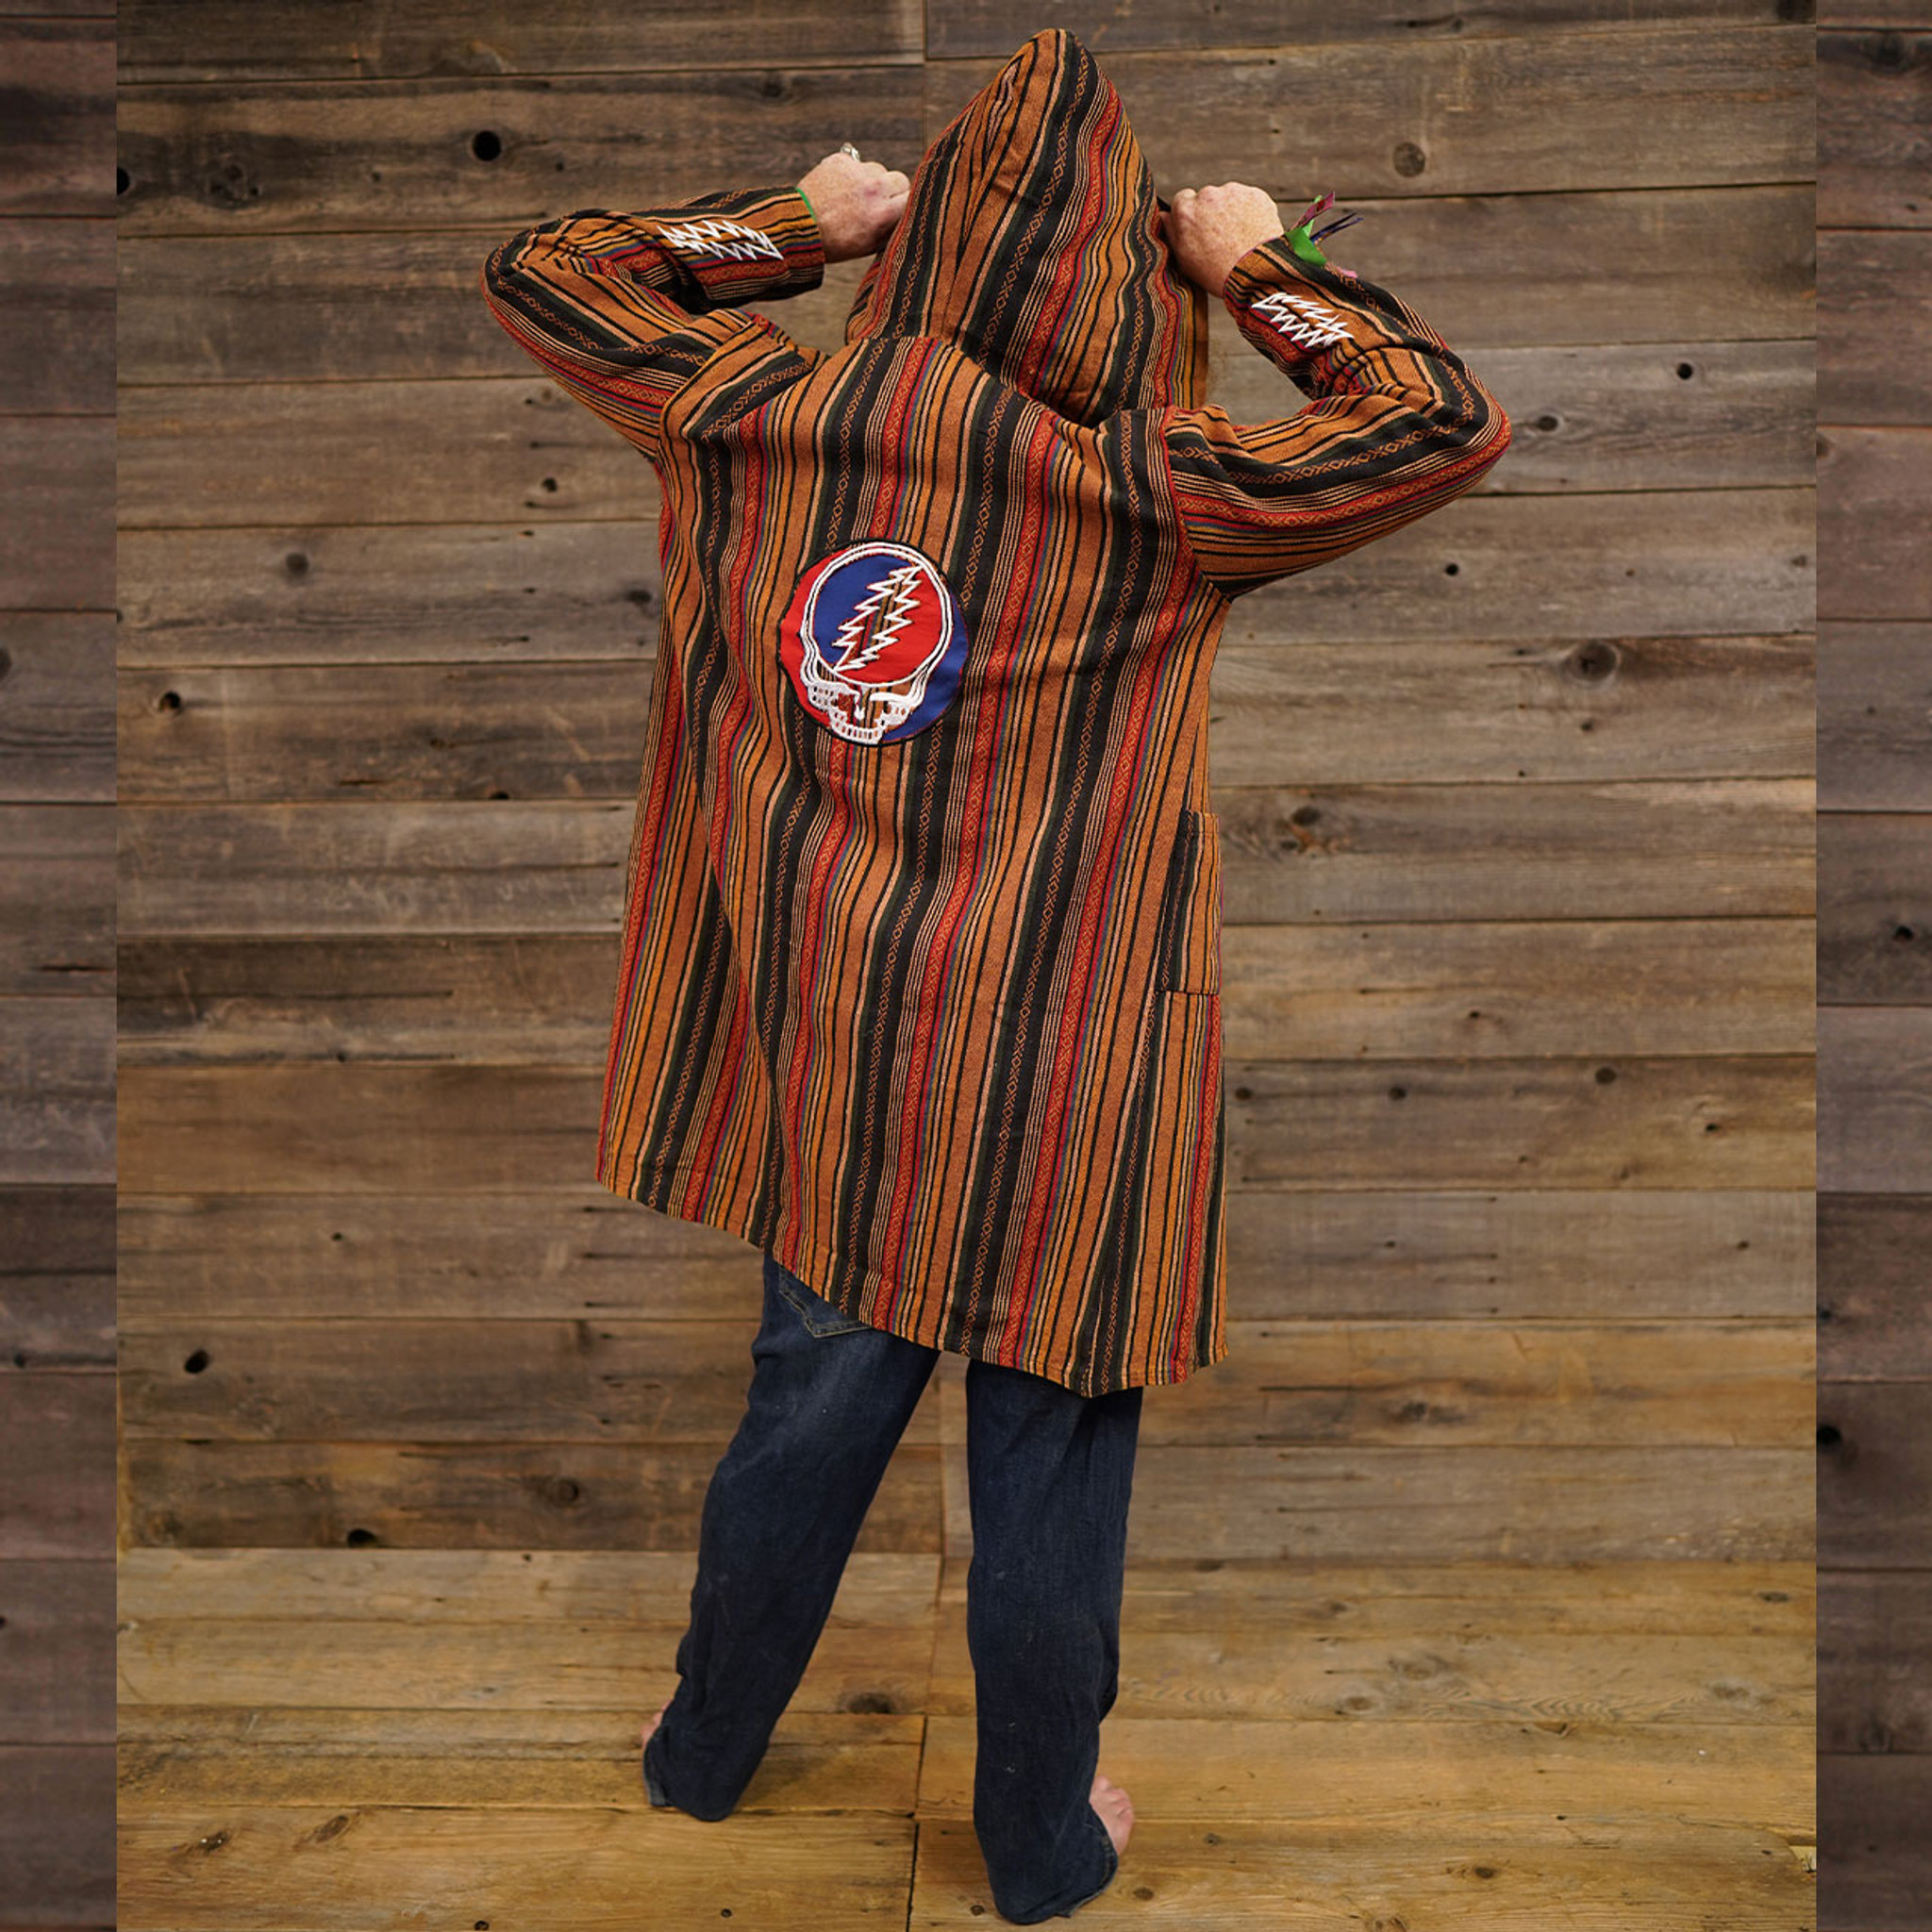 GOIN' DOWN THE LINE JACKET Striped Heavy Cotton Hooded Long Jacket w/ Back Grateful Dead Streal Your Face Applique'